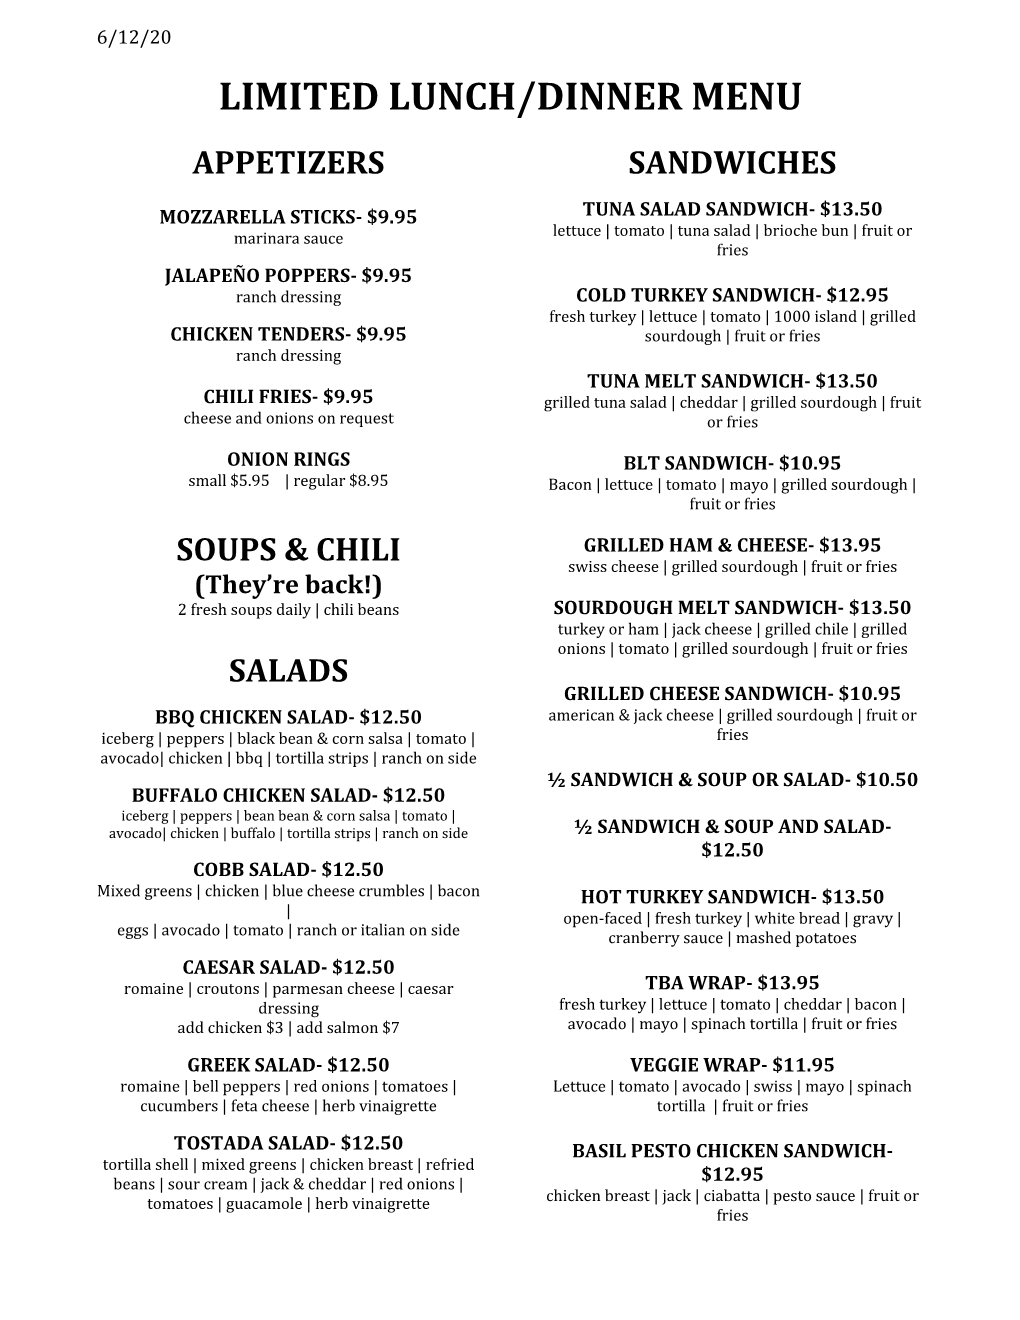 Limited Lunch/Dinner Menu